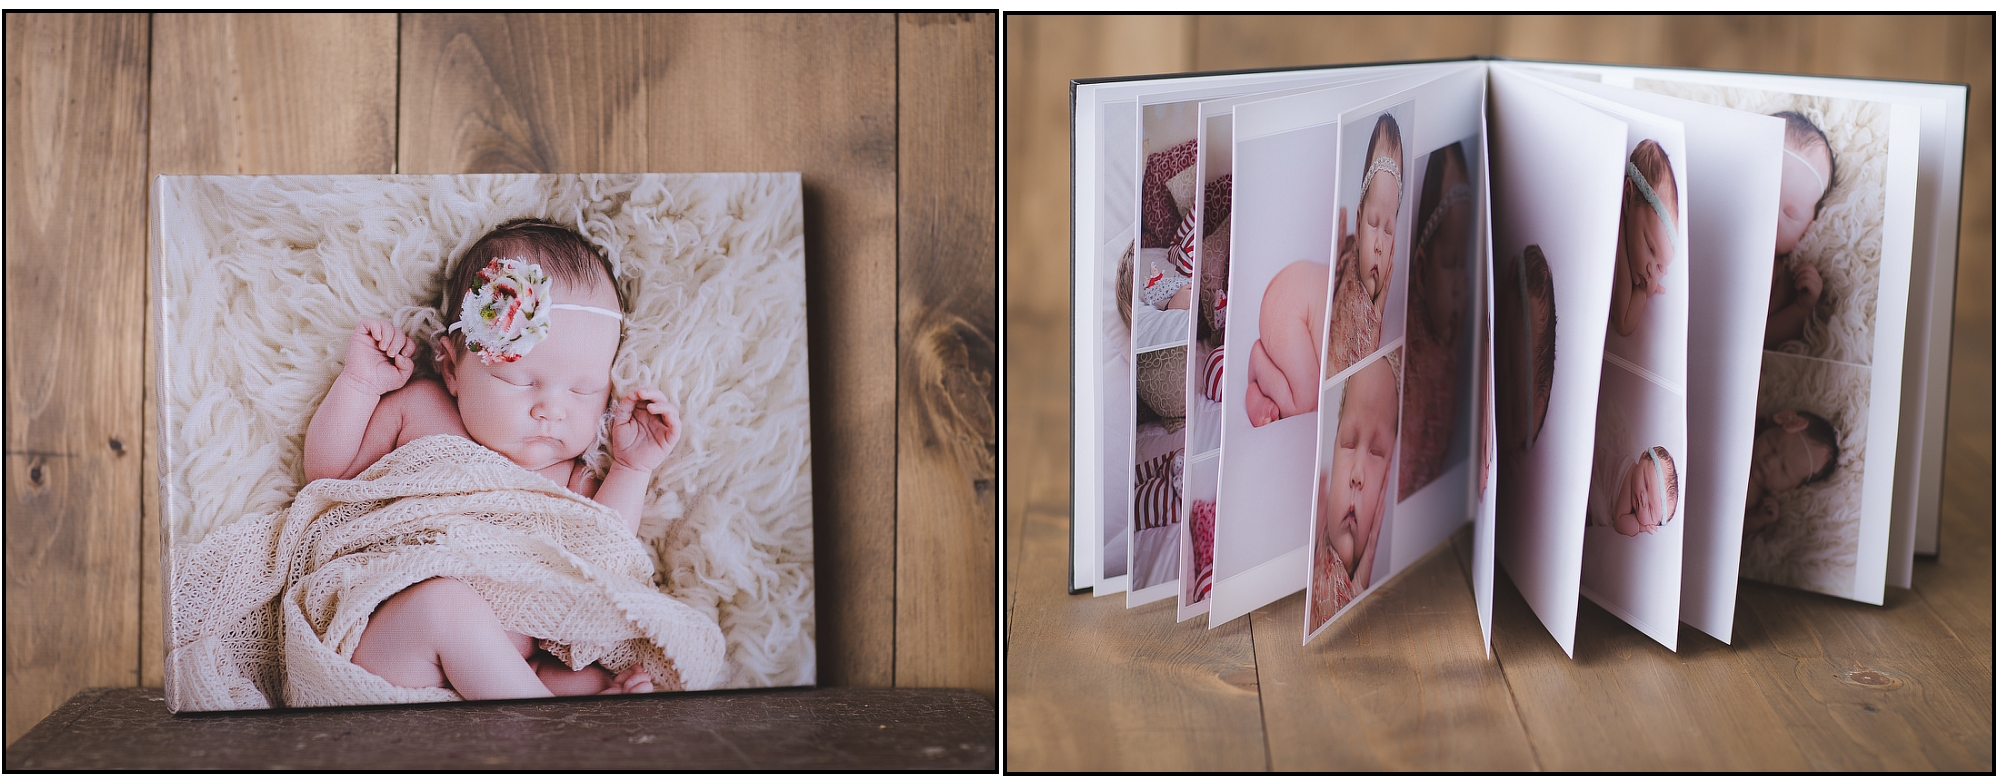 new river family photographer, kristina rose photography, canvas of baby, photo album of baby